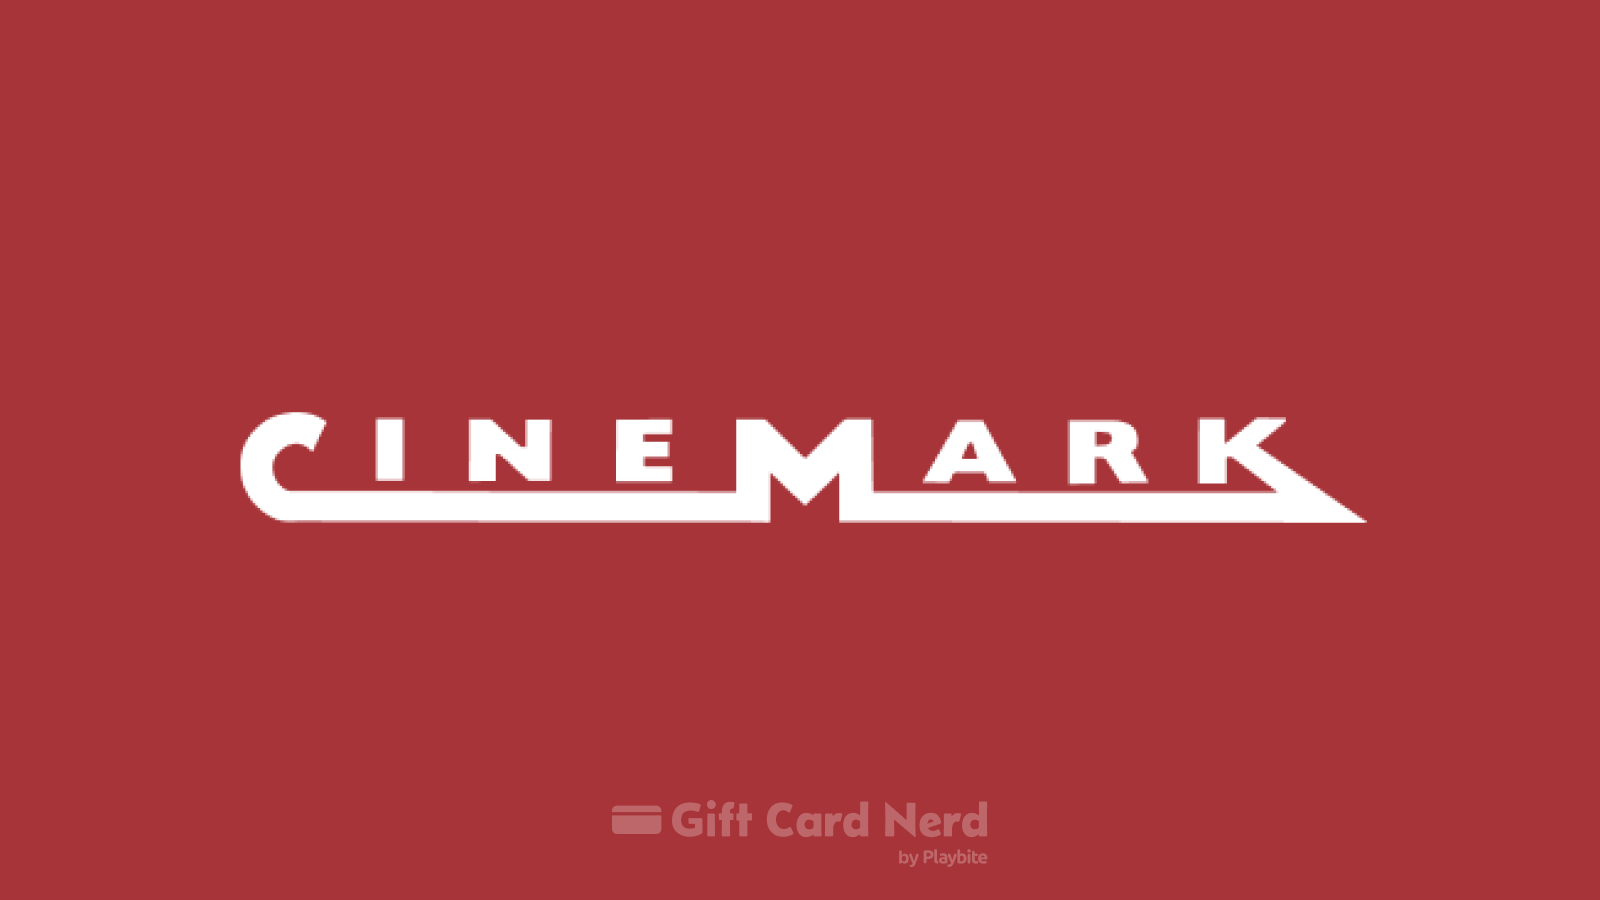 Can I Use a Cinemark Gift Card on PayPal?